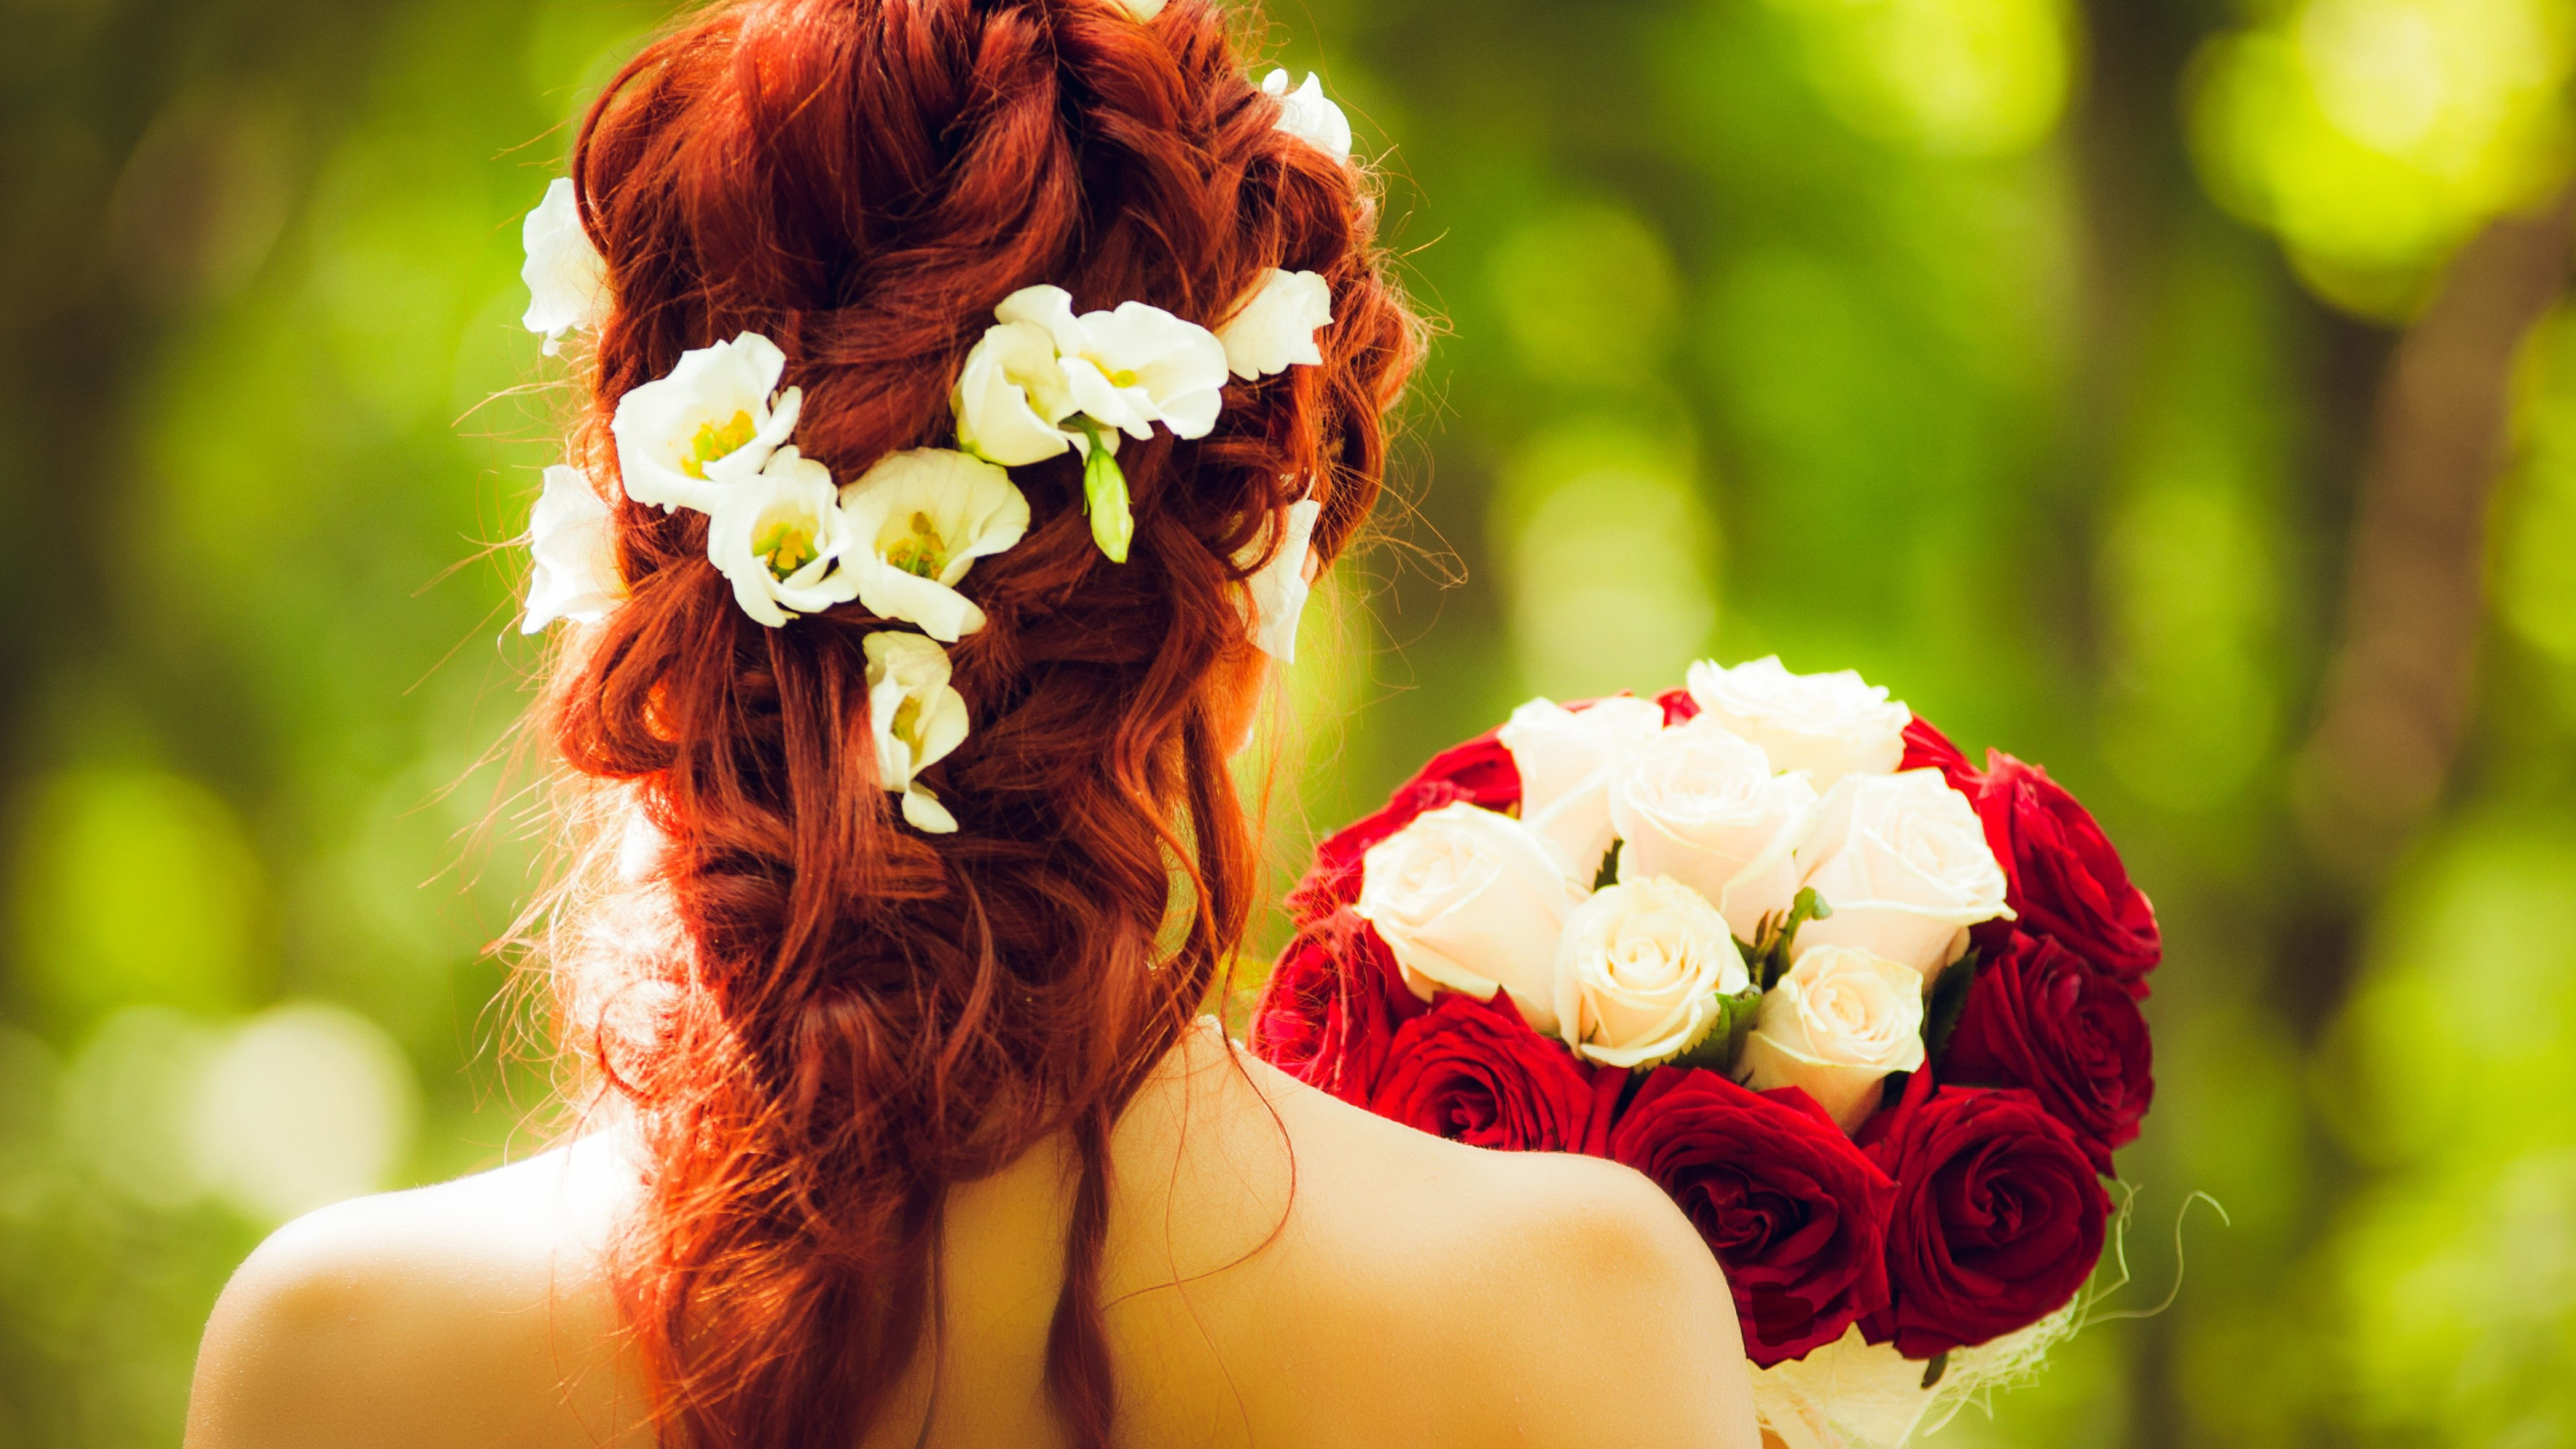 Download wallpaper: Bride and wedding flowers 2880x1620